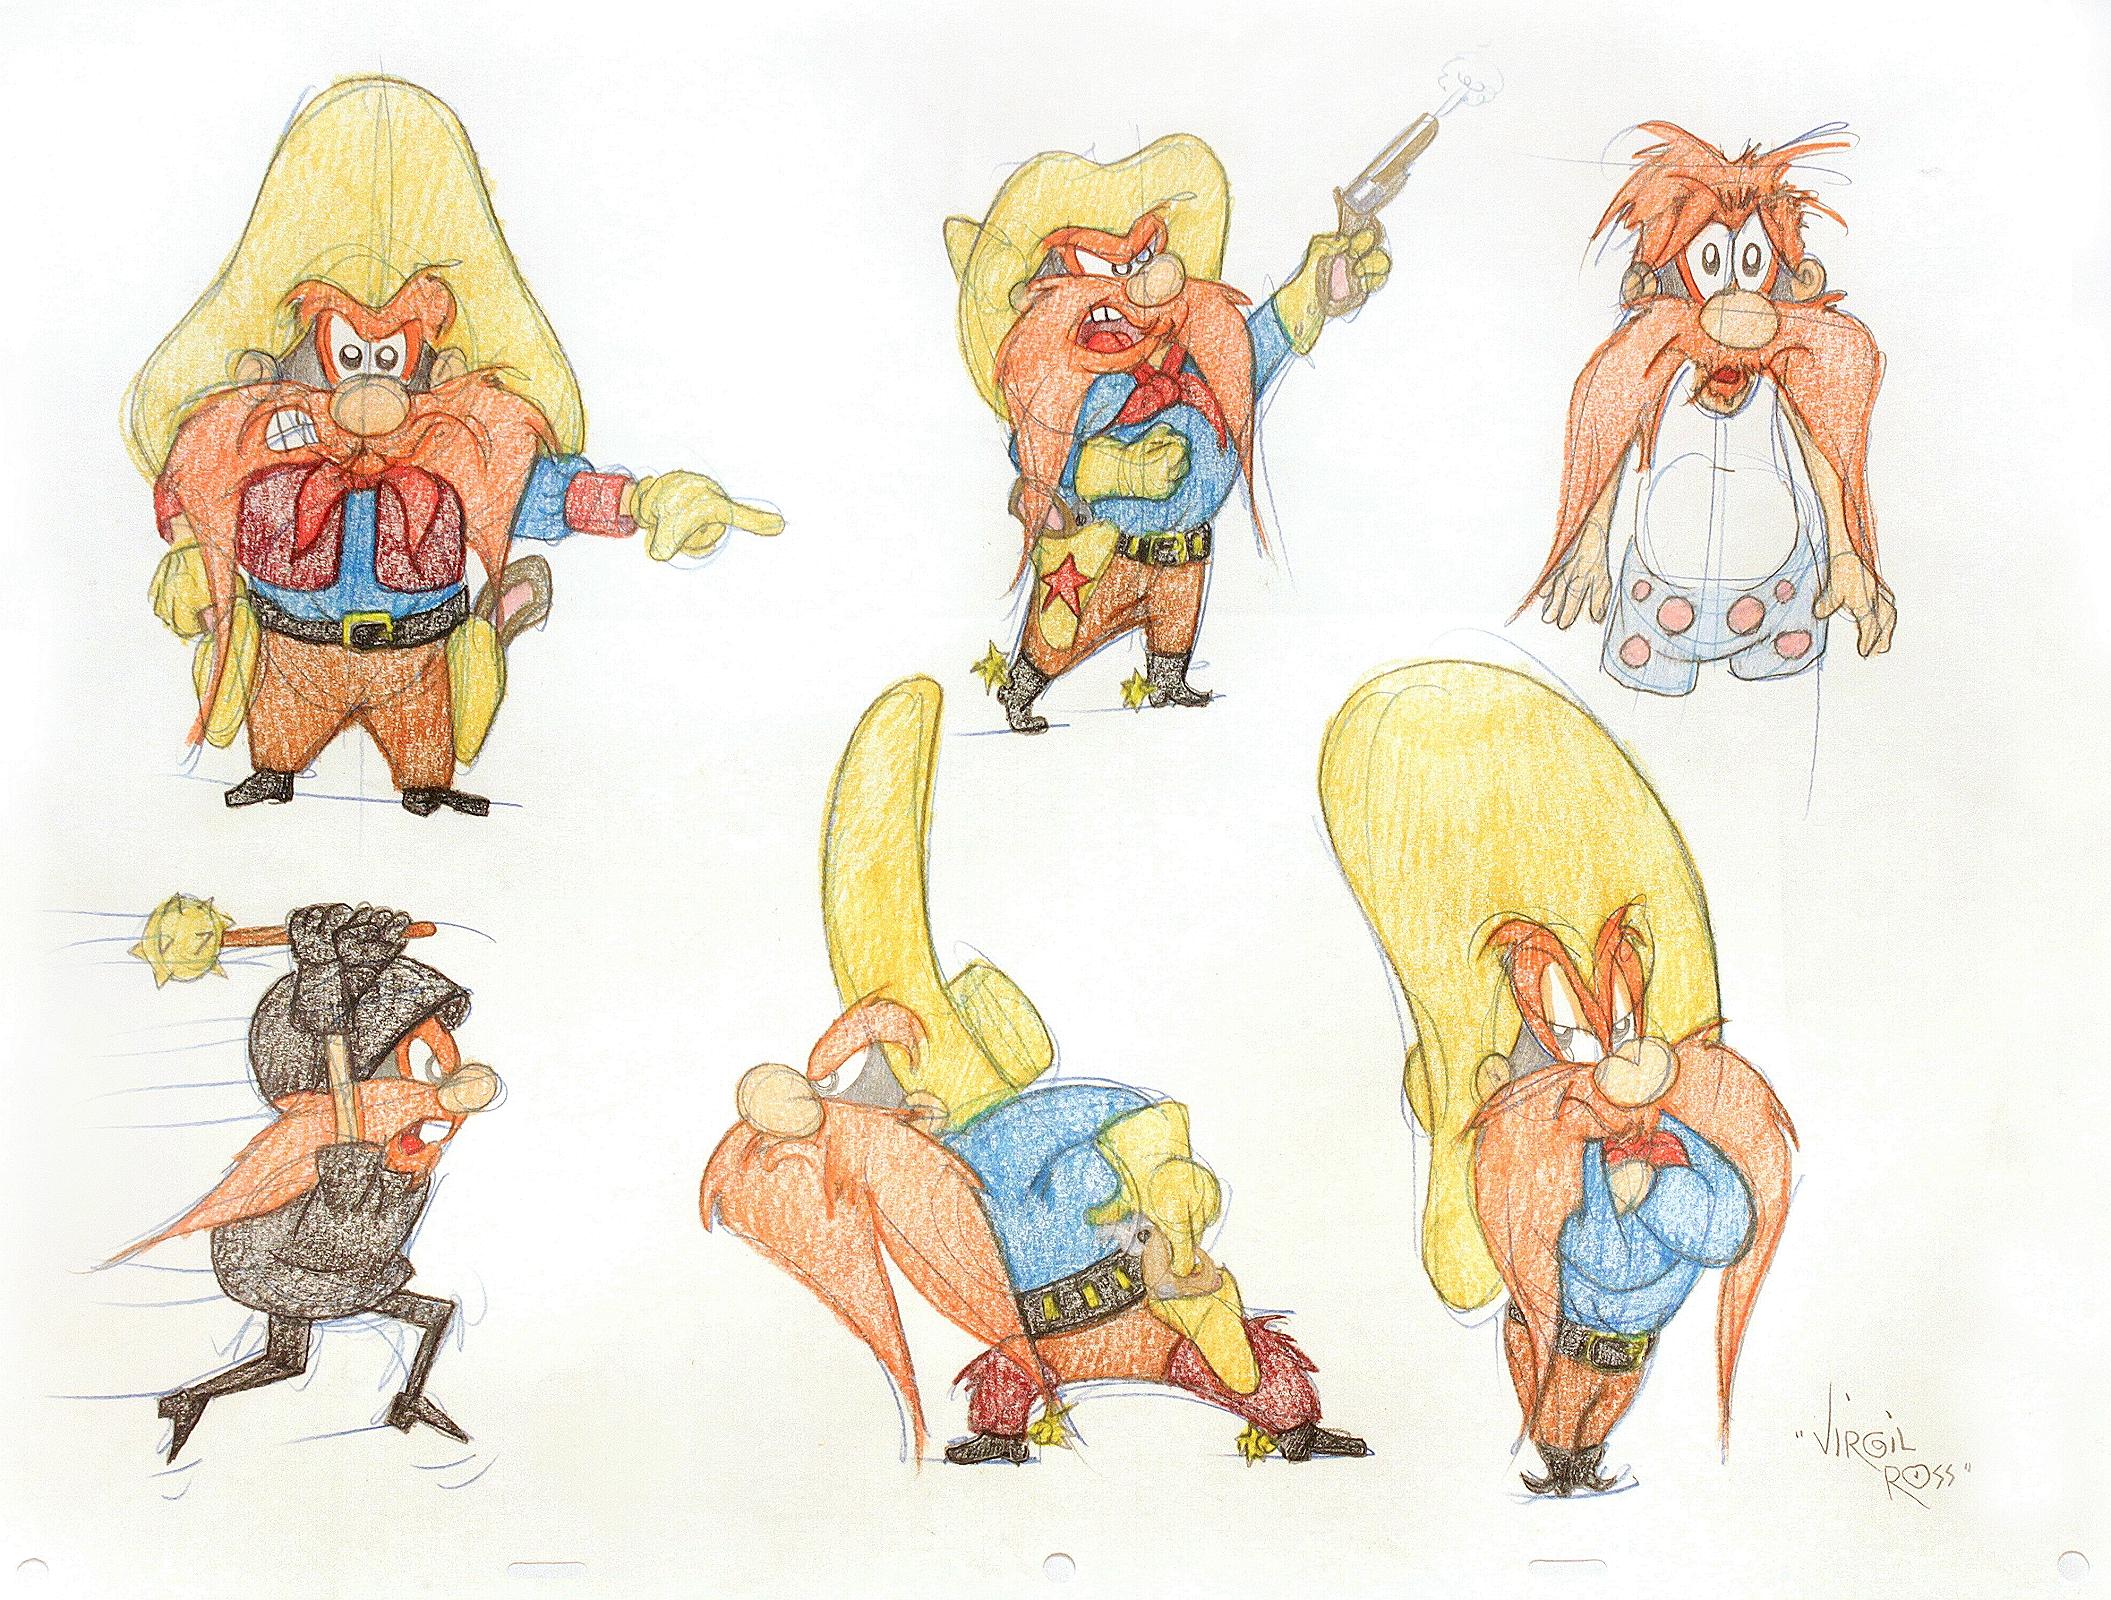 SIX ORIGINAL DRAWINGS OF YOSEMITE SAM - Signed By Virgil Ross In Excellent Condition For Sale In Hillsborough, NJ